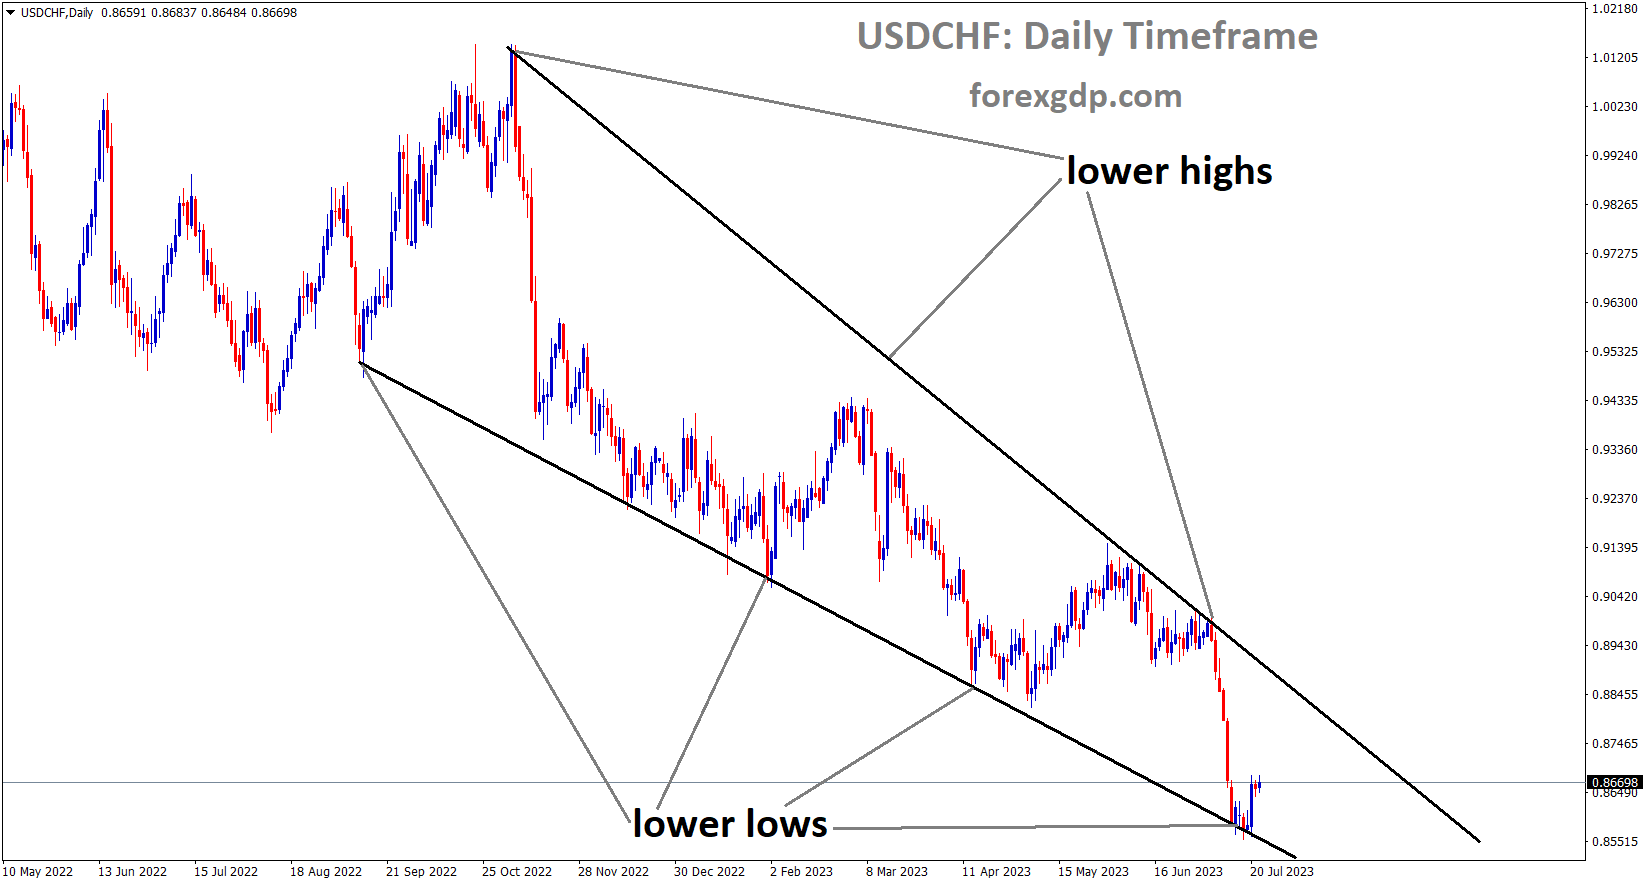 USDCHF is moving in the Falling wedge pattern and the market has rebounded from the lower low area of the pattern